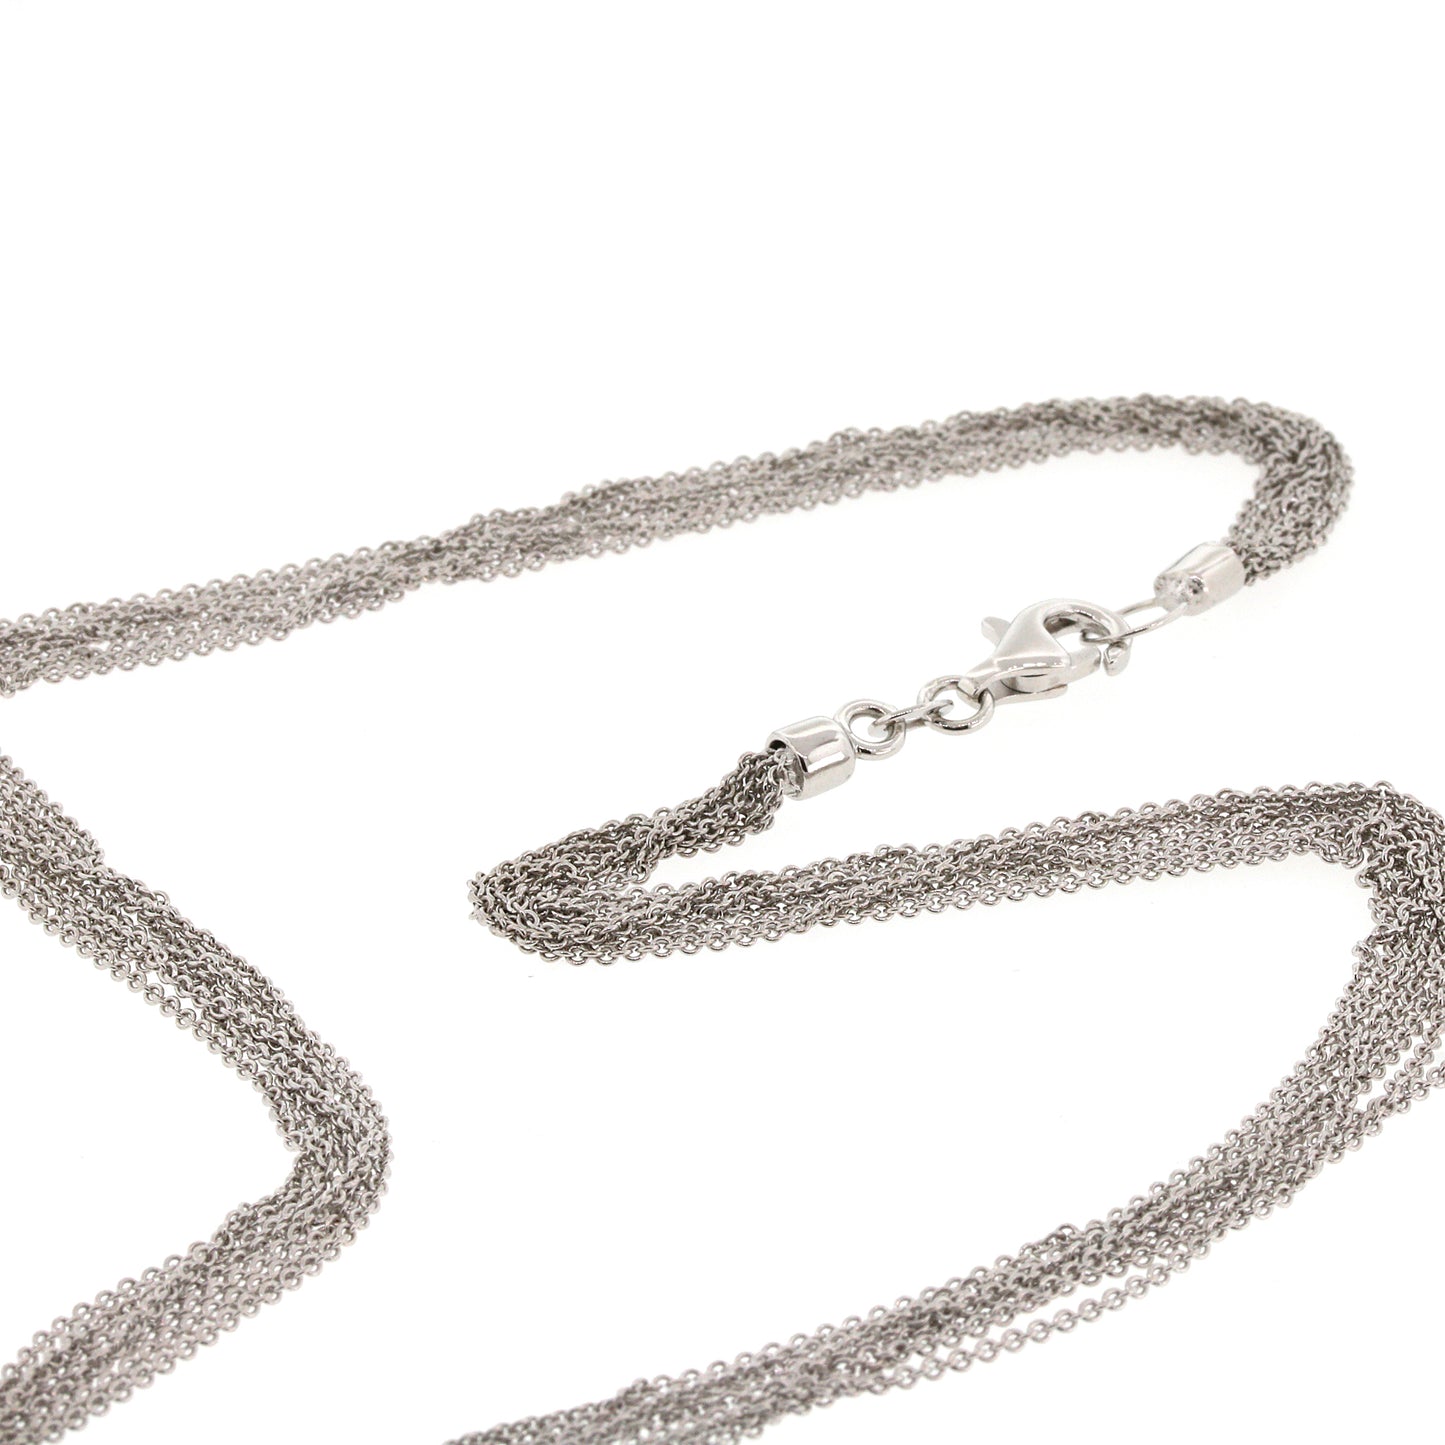 Platinum Diamond Pave Heart with 7-row Chain Necklace